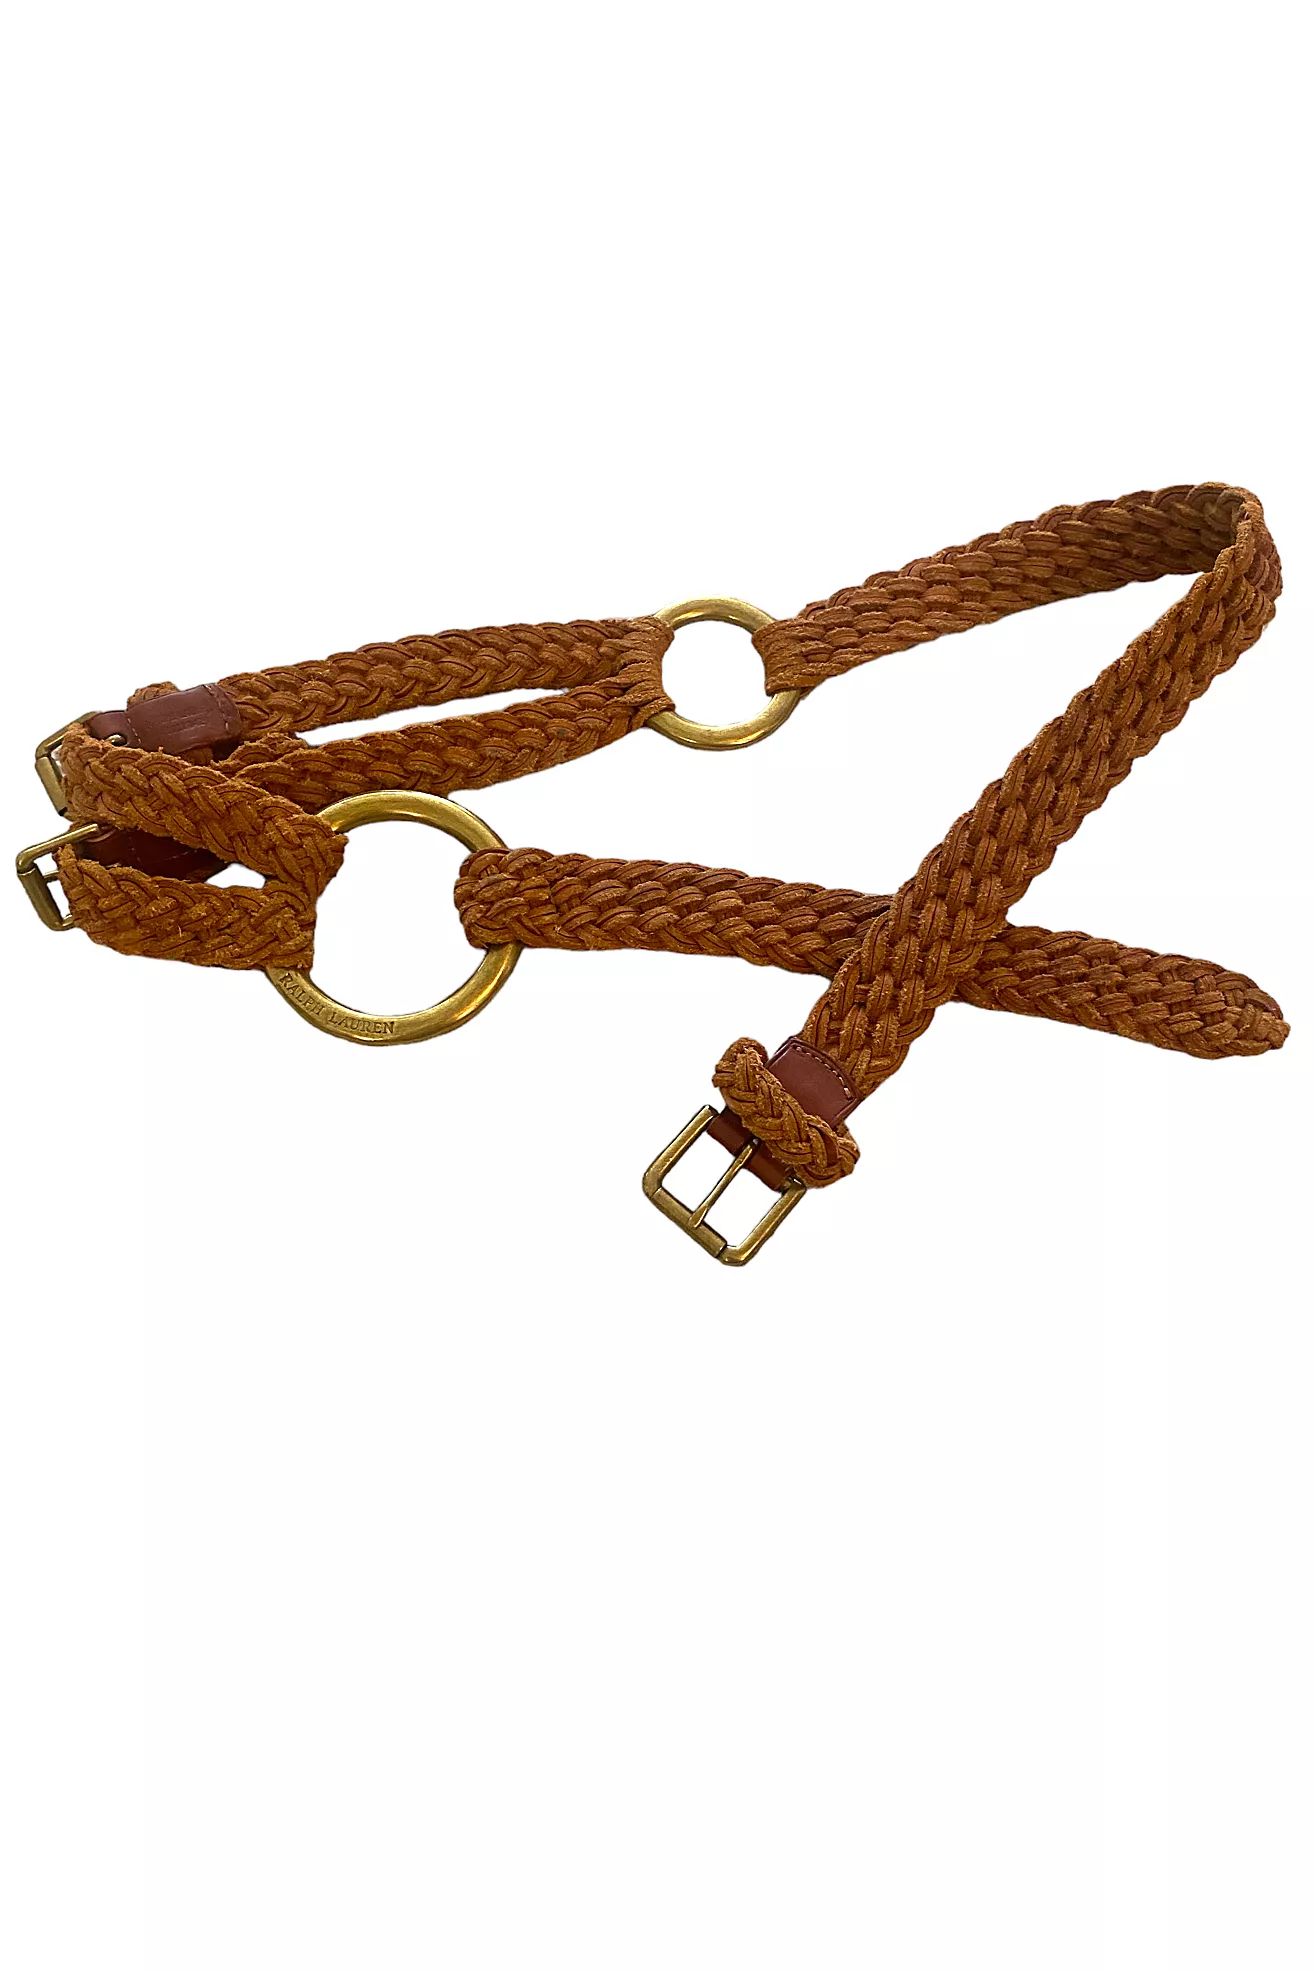 Ralph Lauren Leather Braided and Brass Belt Selected by BusyLady Baca & The Goods | Free People (Global - UK&FR Excluded)